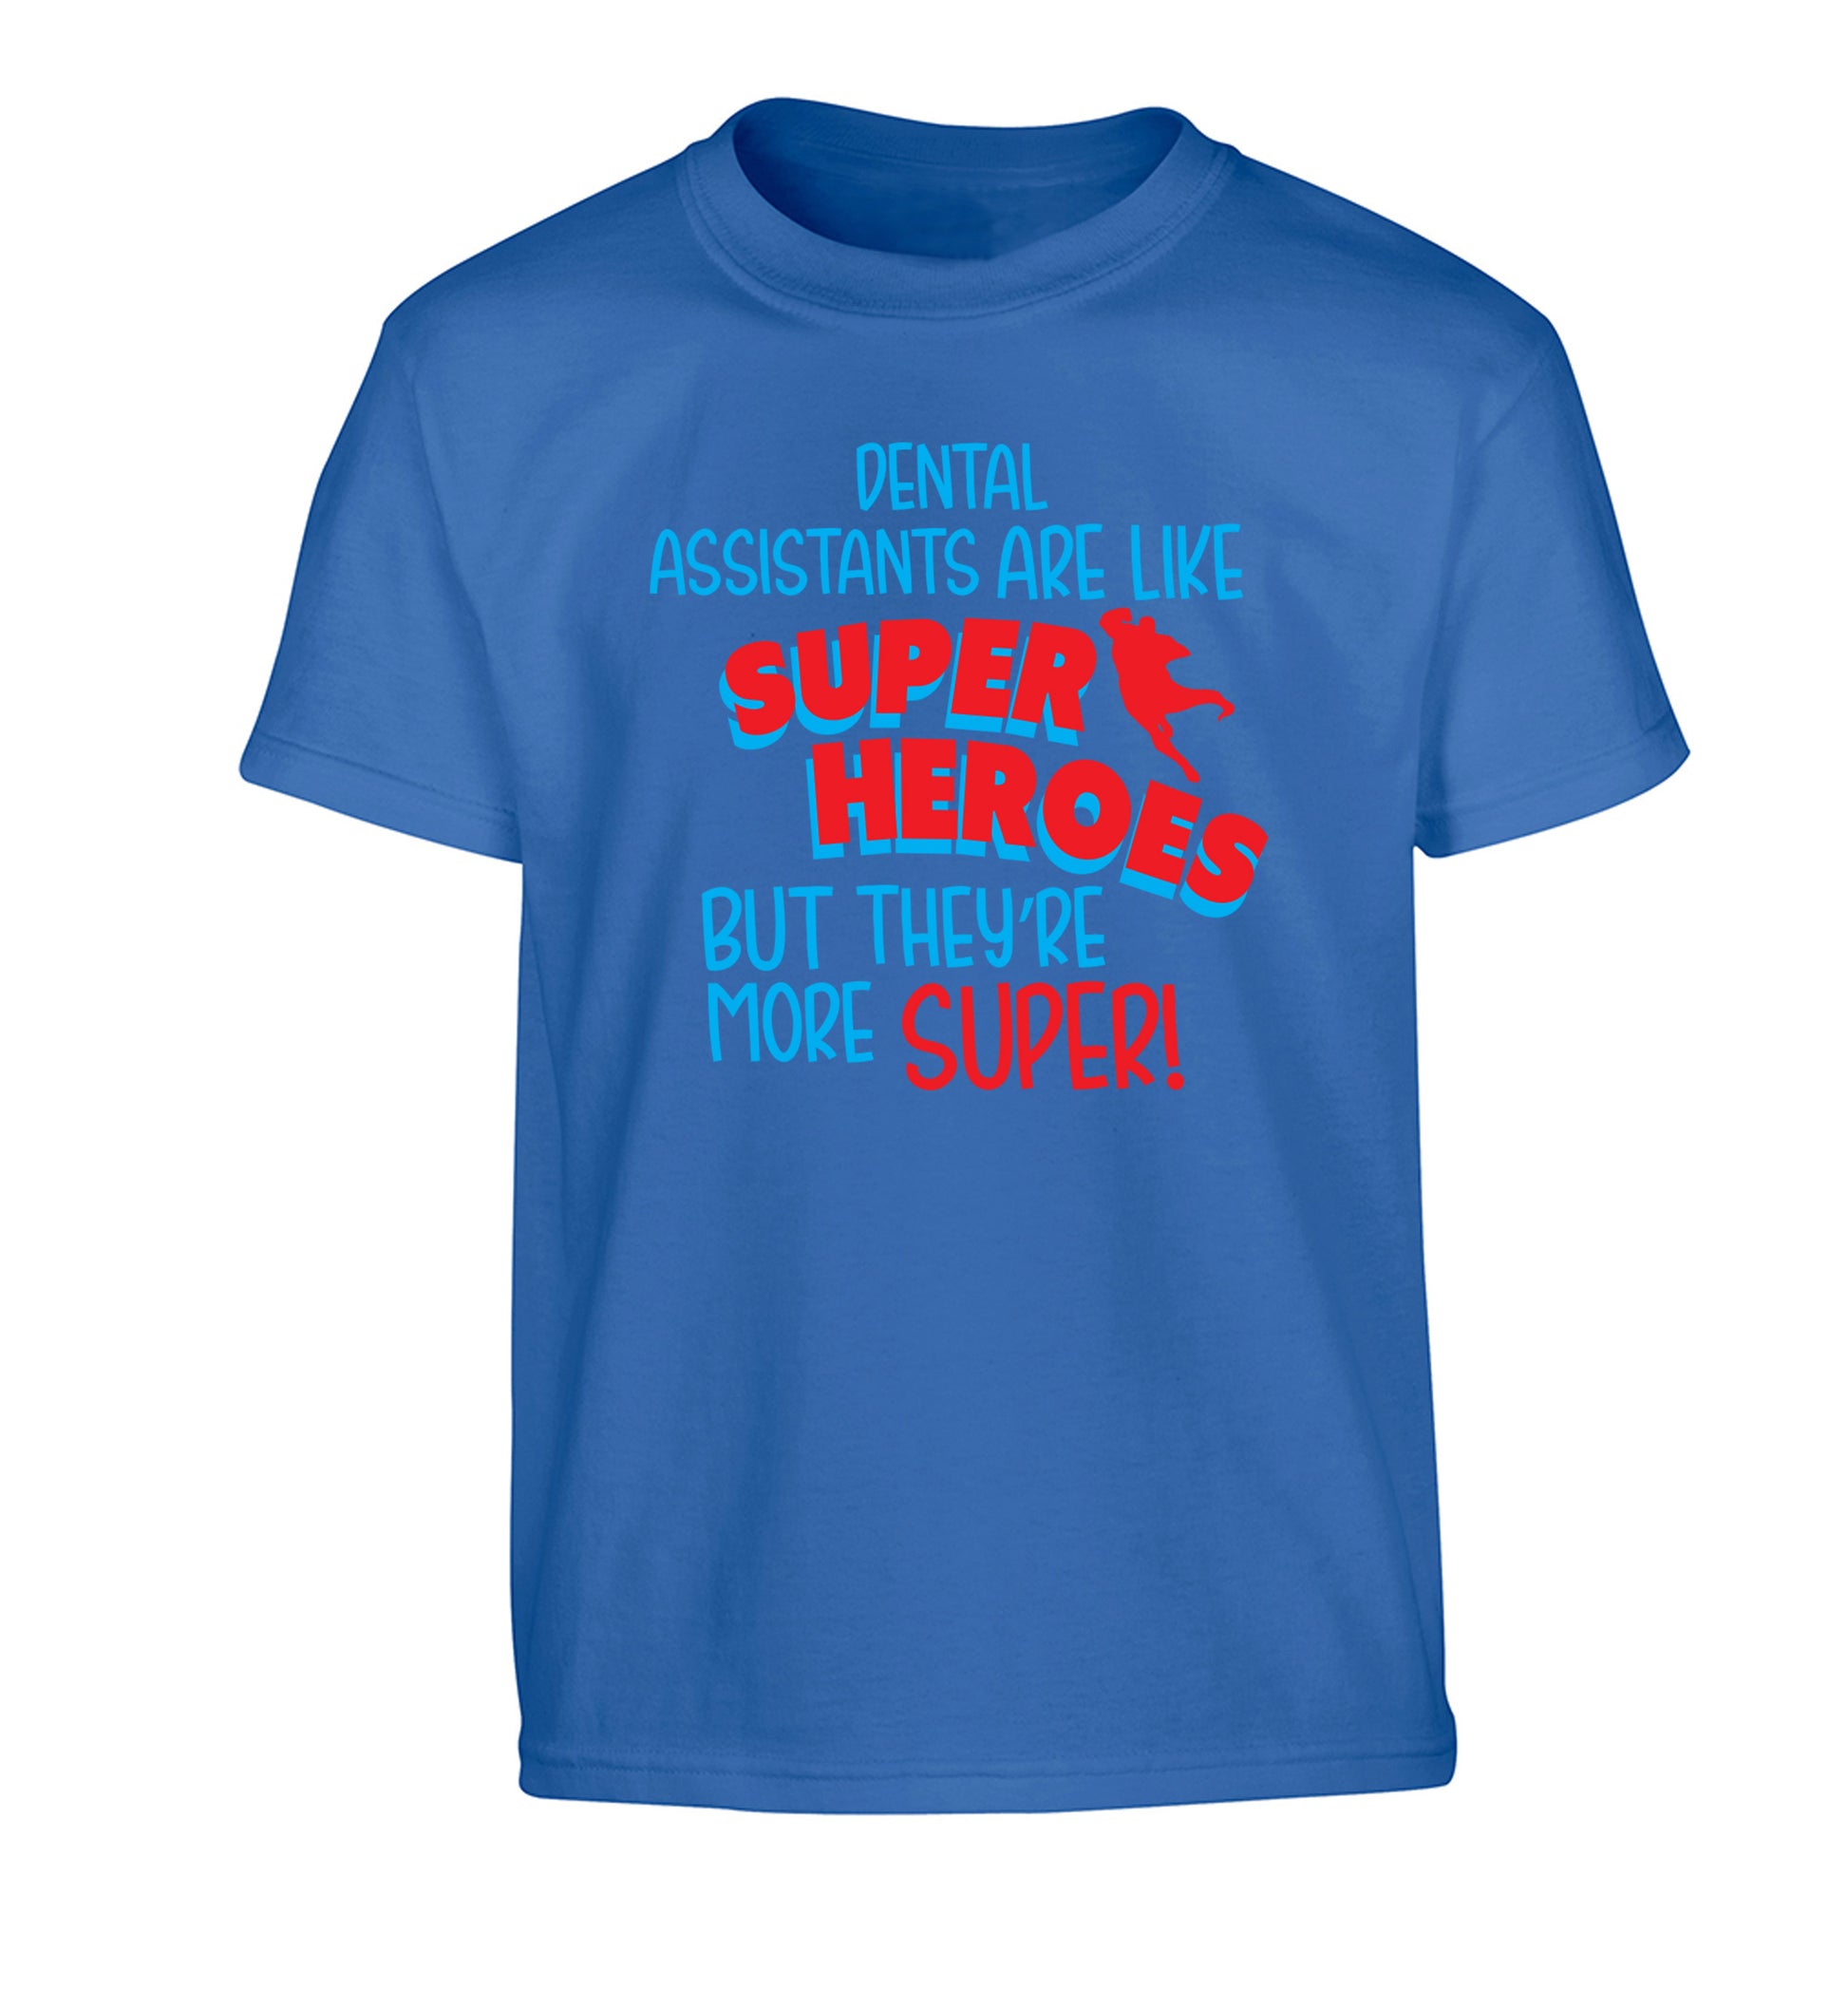 Dental Assistants are like superheros but they're more super Children's blue Tshirt 12-13 Years